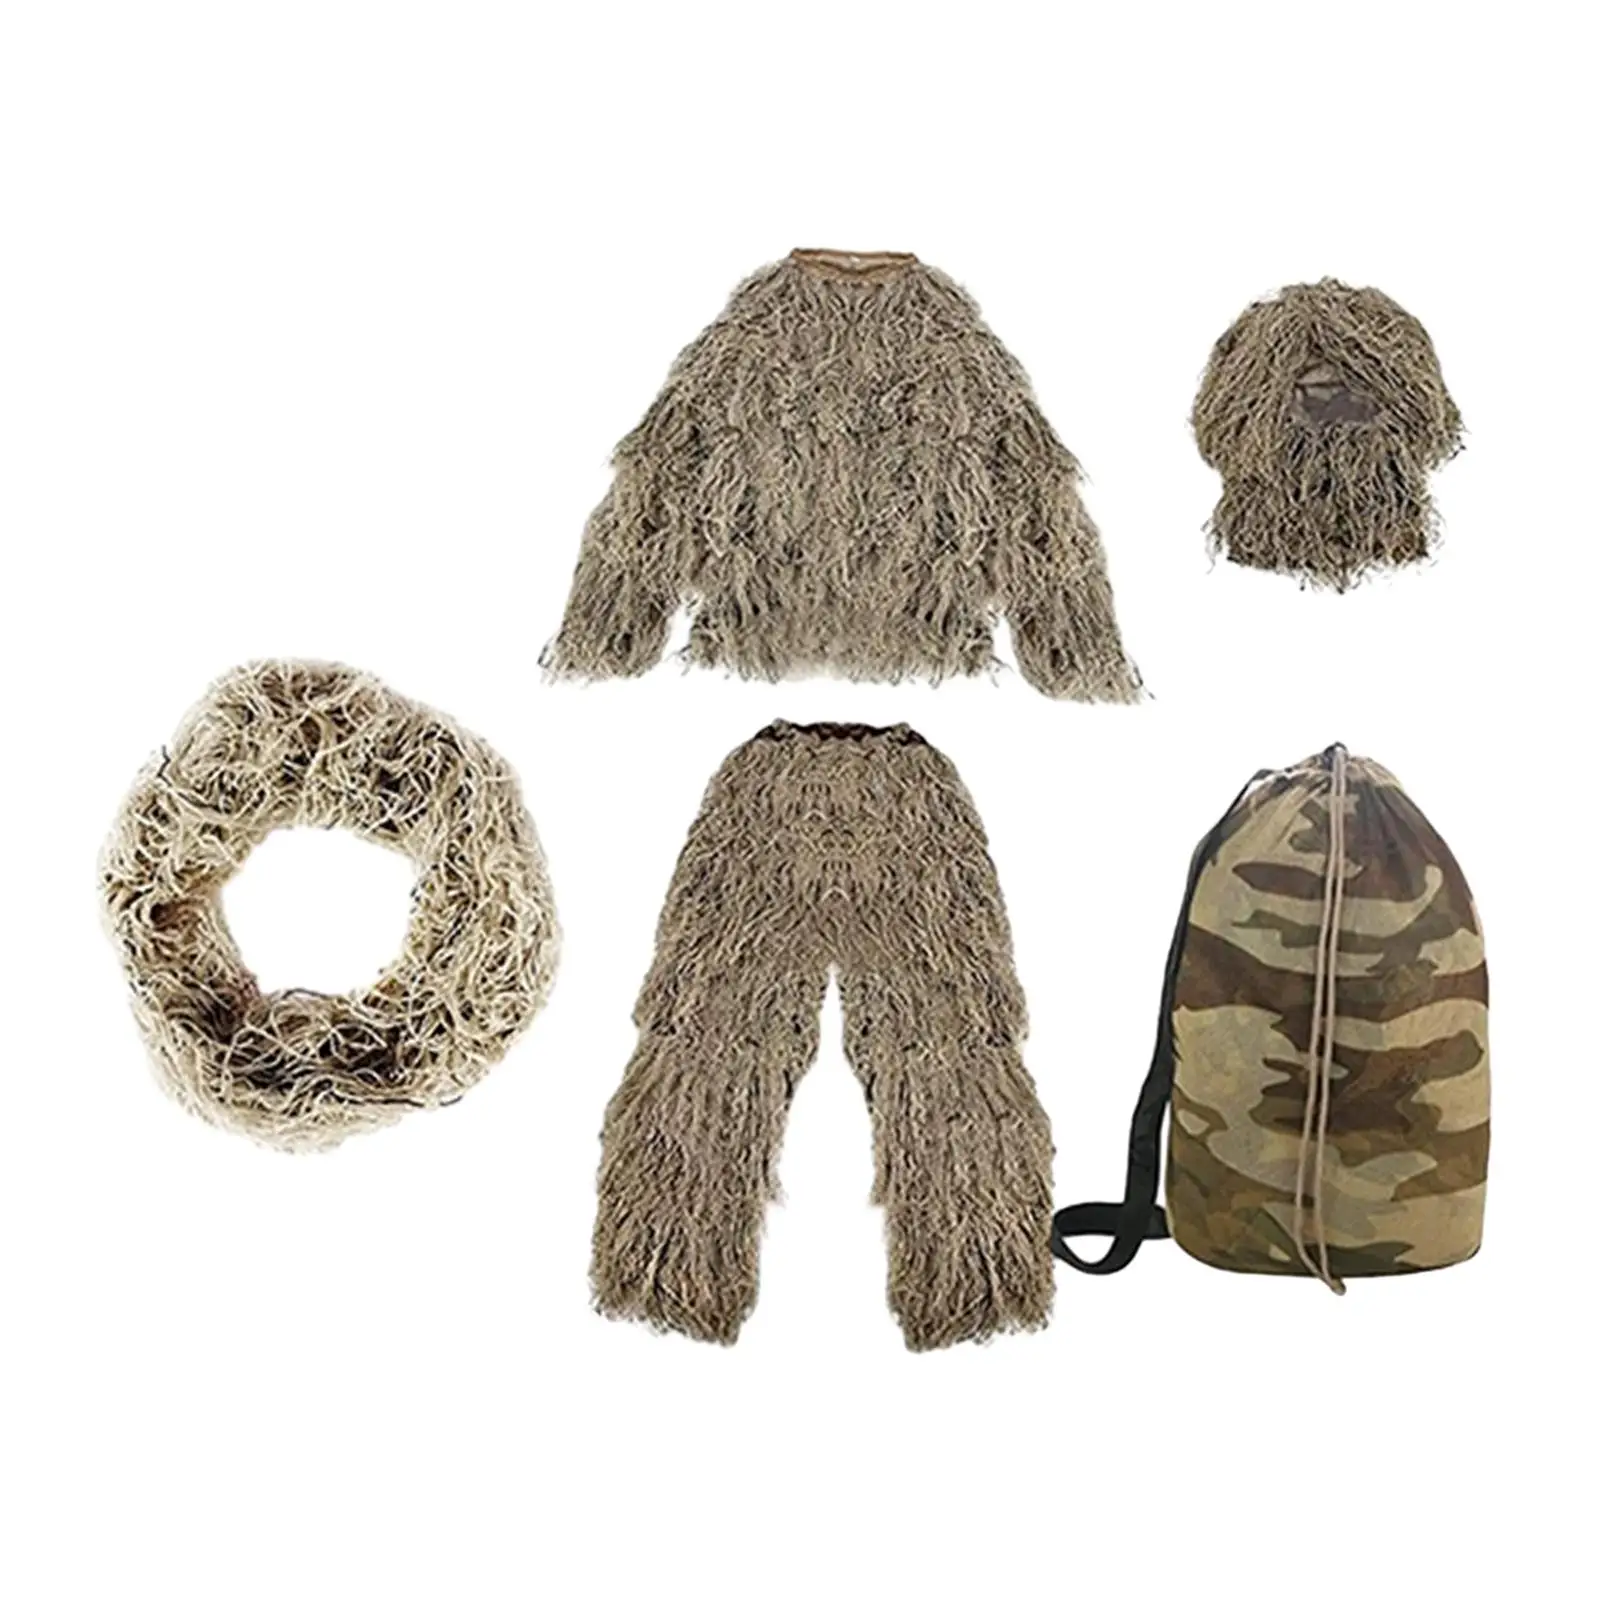 Kids Ghillie Suit Jacket Pants Woodland Clothing Uniform Set Costume for Hunting Bird Watching Jungle Halloween Accessories